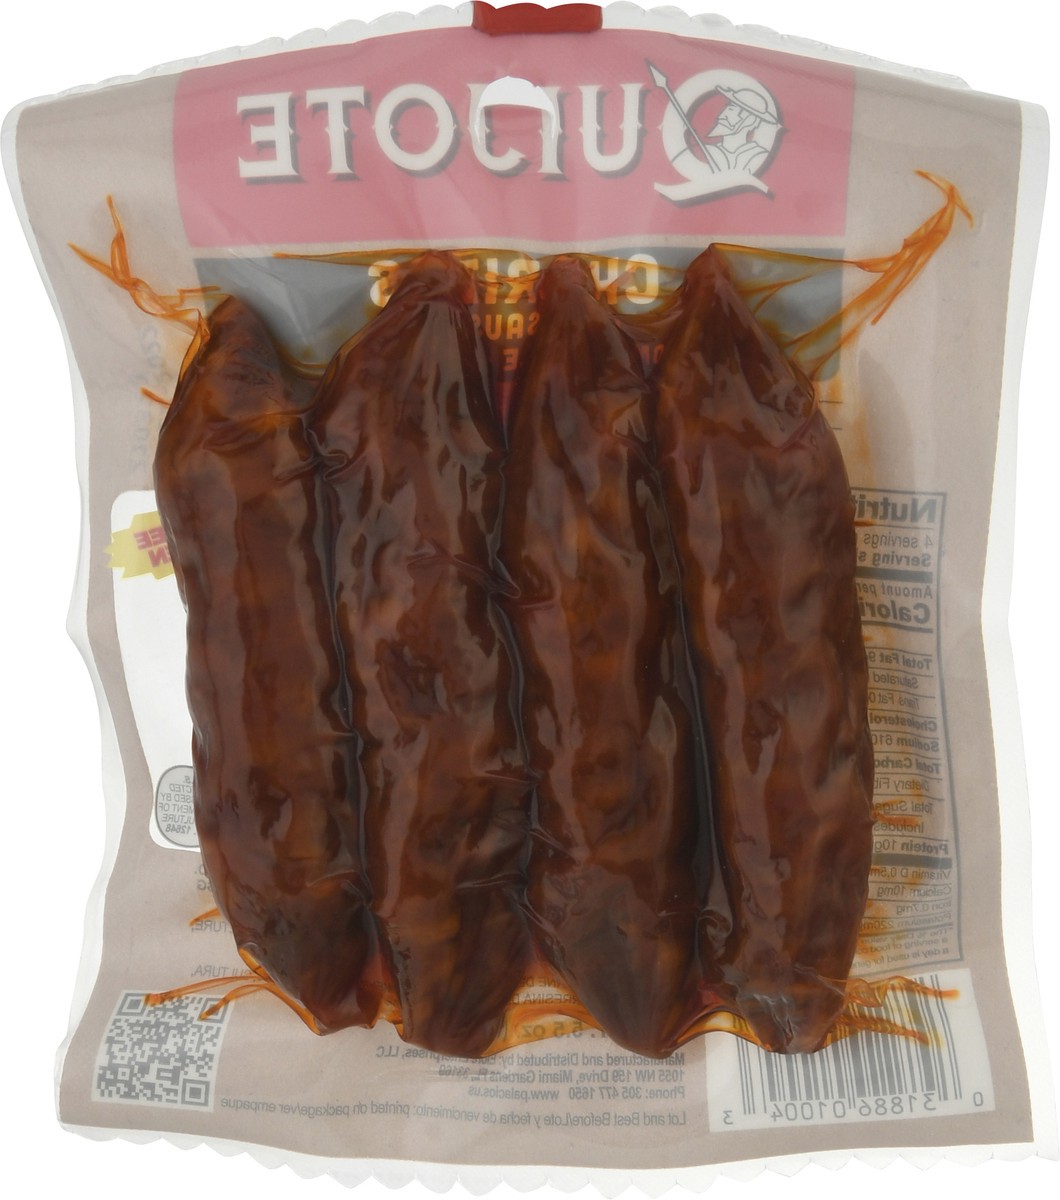 slide 10 of 12, Quijote Chorizos Caseros (Homestyle Dried Sausage) 4-Pack, 5.5 oz